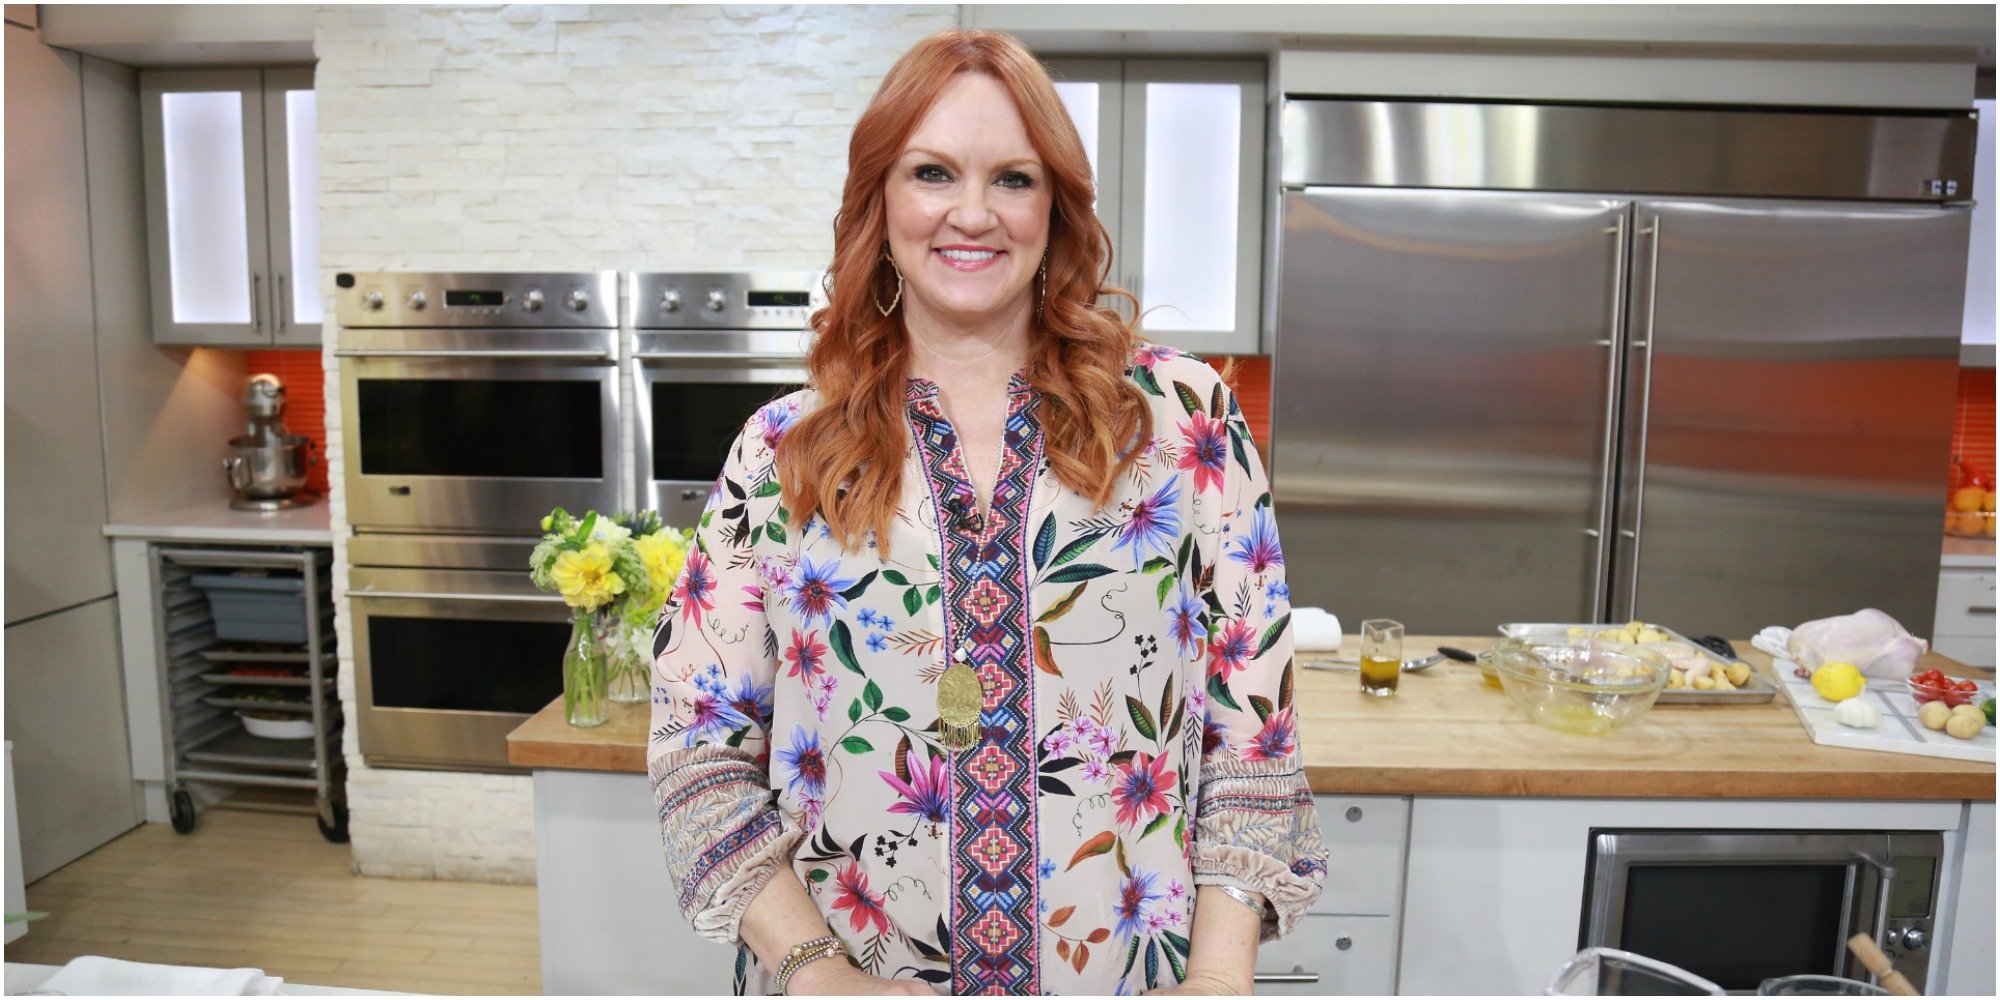 Ree Drummond on the set of a cooking segment.